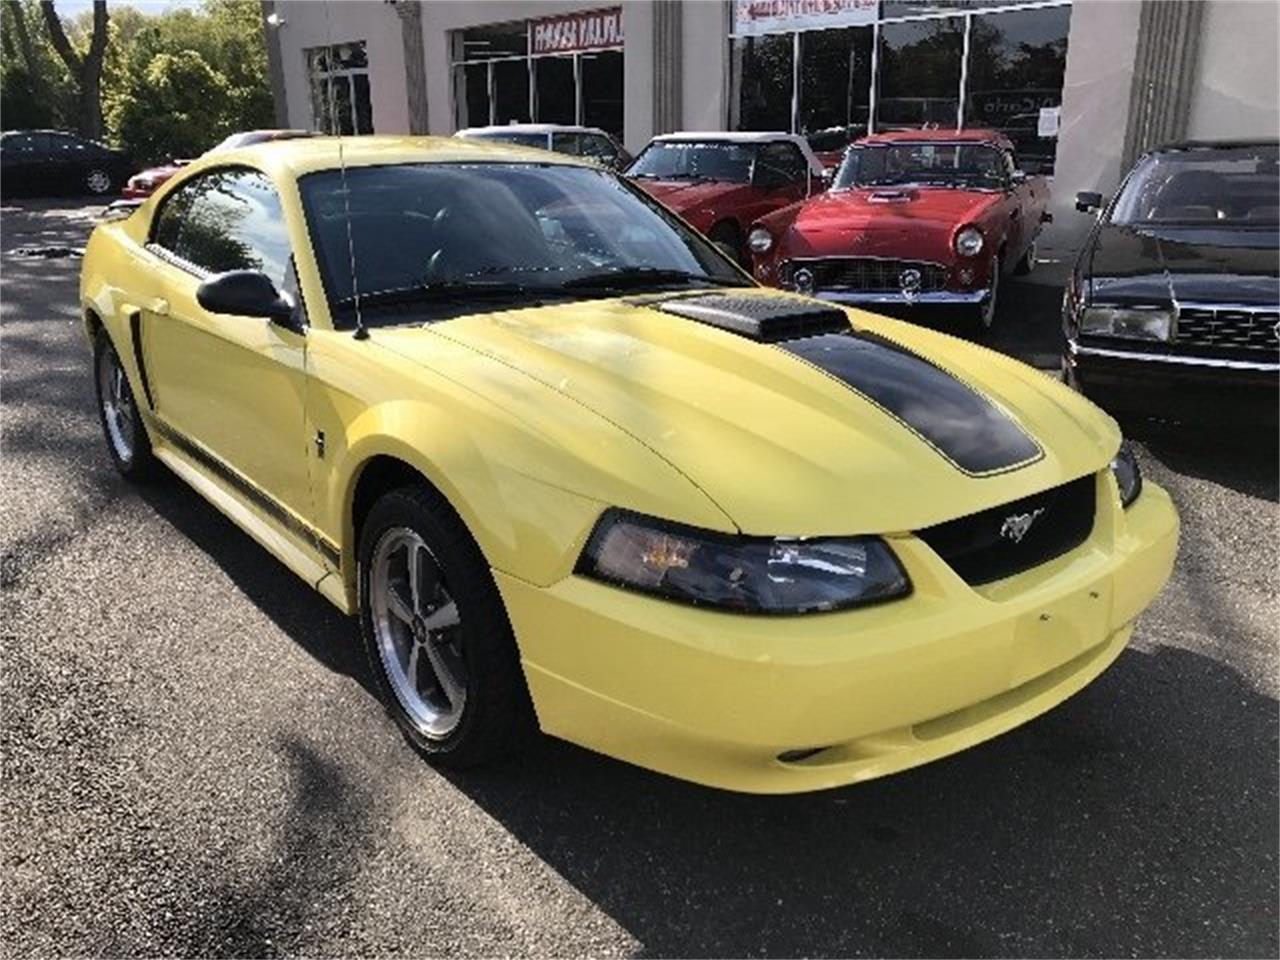 2003 Ford Mustang Mach 1 for Sale | ClassicCars.com | CC-997238